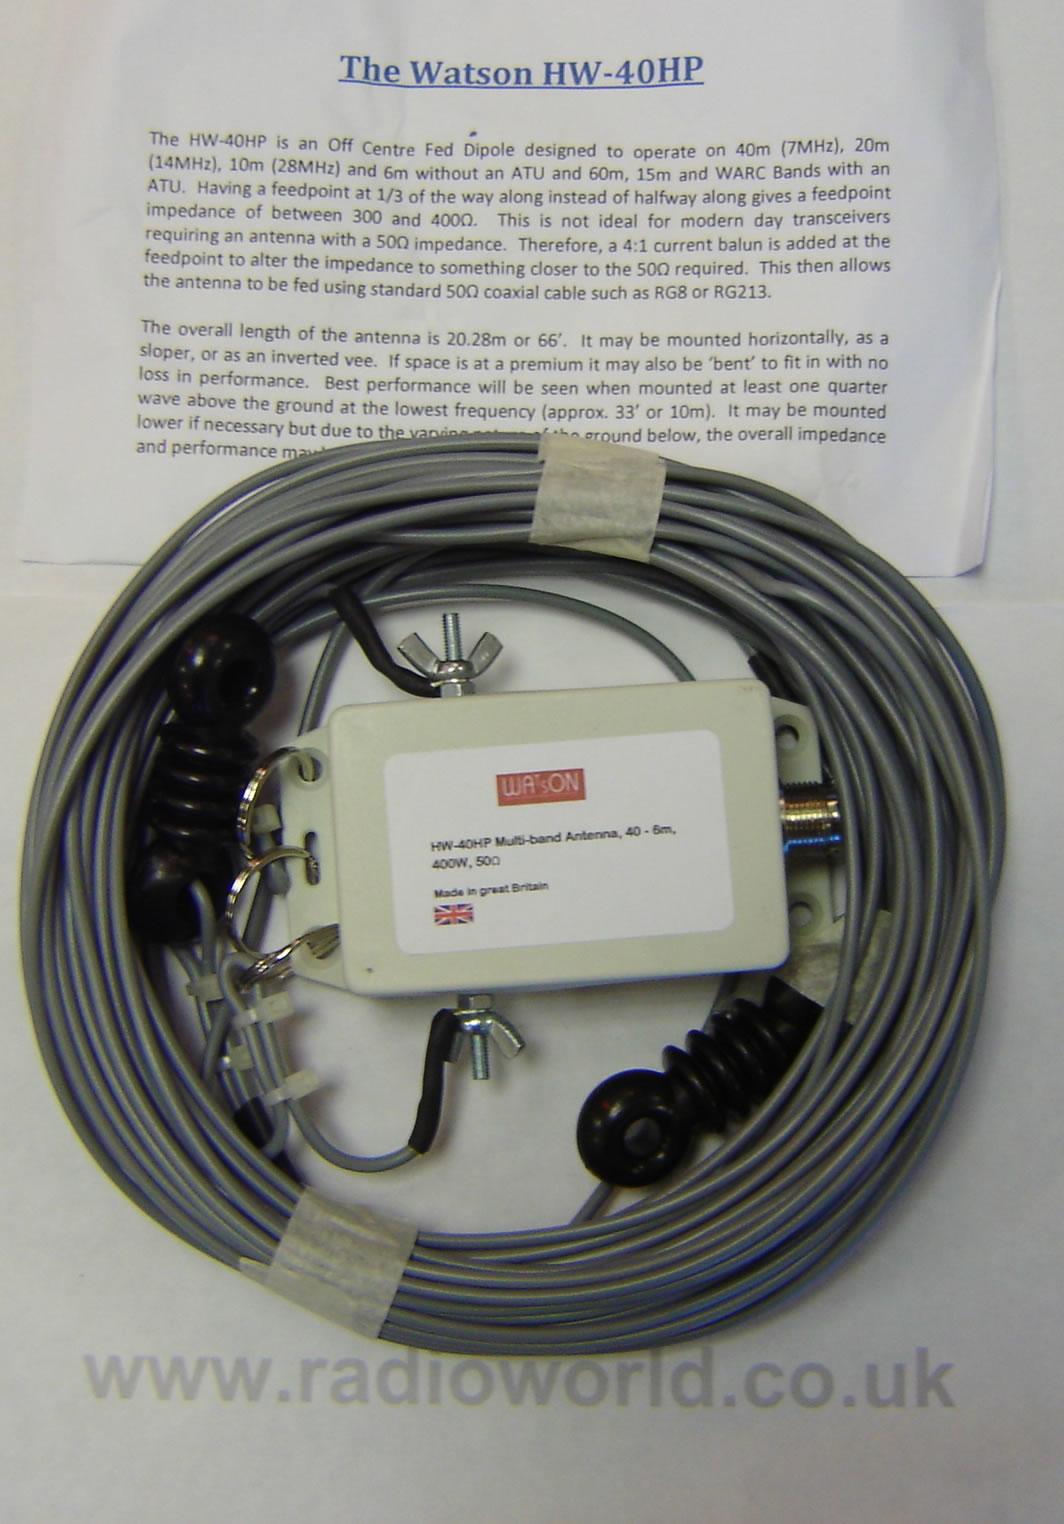 HW-40HP Multiband HF off-centre fed dipole with 4:1 balun 80-10m